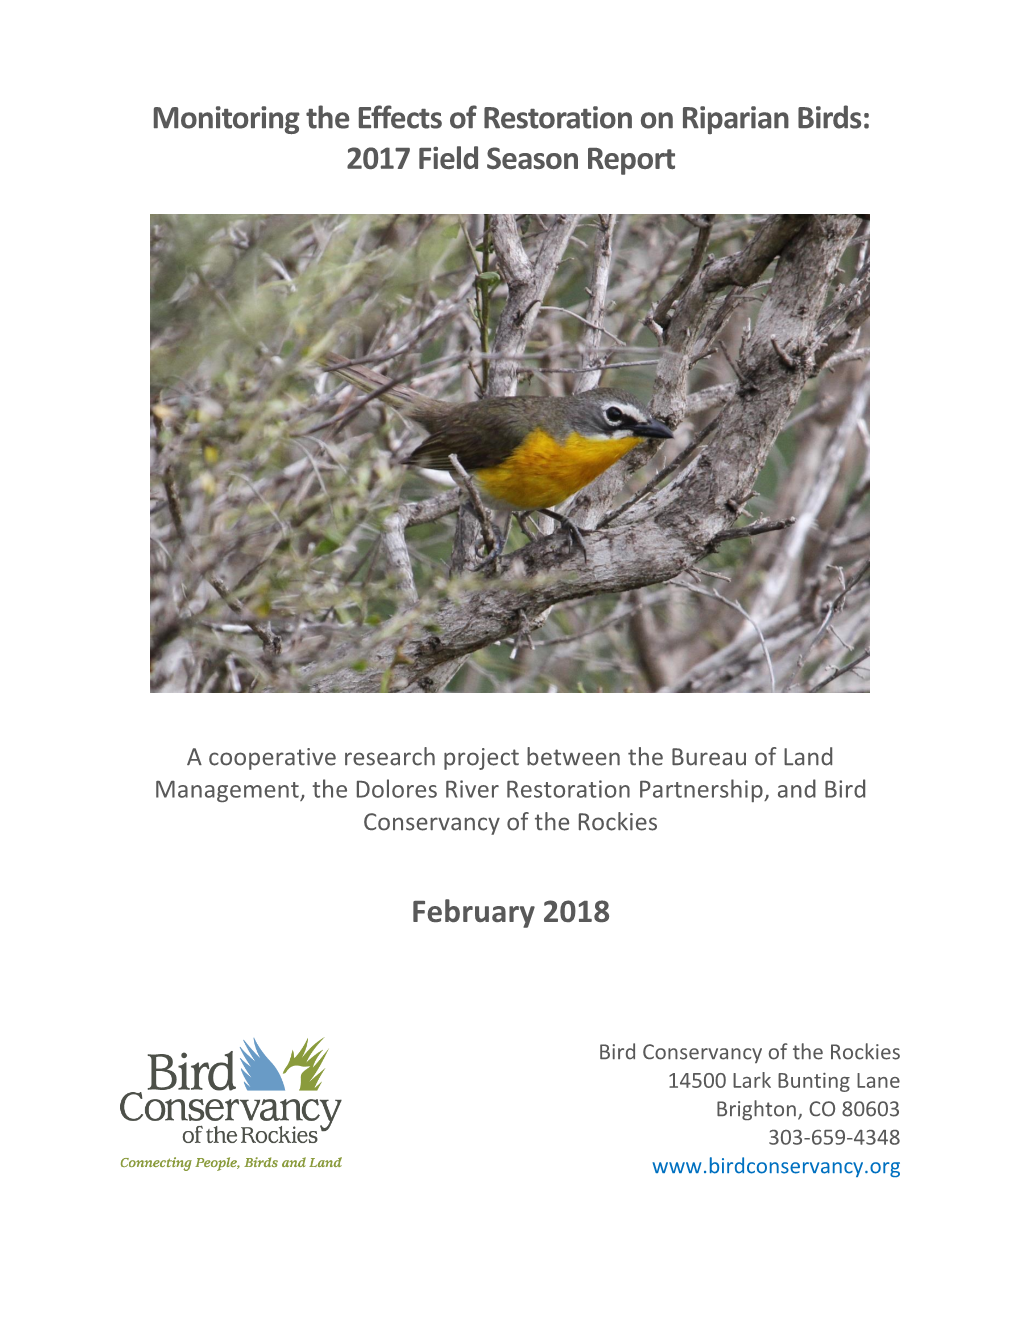 Monitoring the Effects of Restoration on Riparian Birds: 2017 Field Season Report